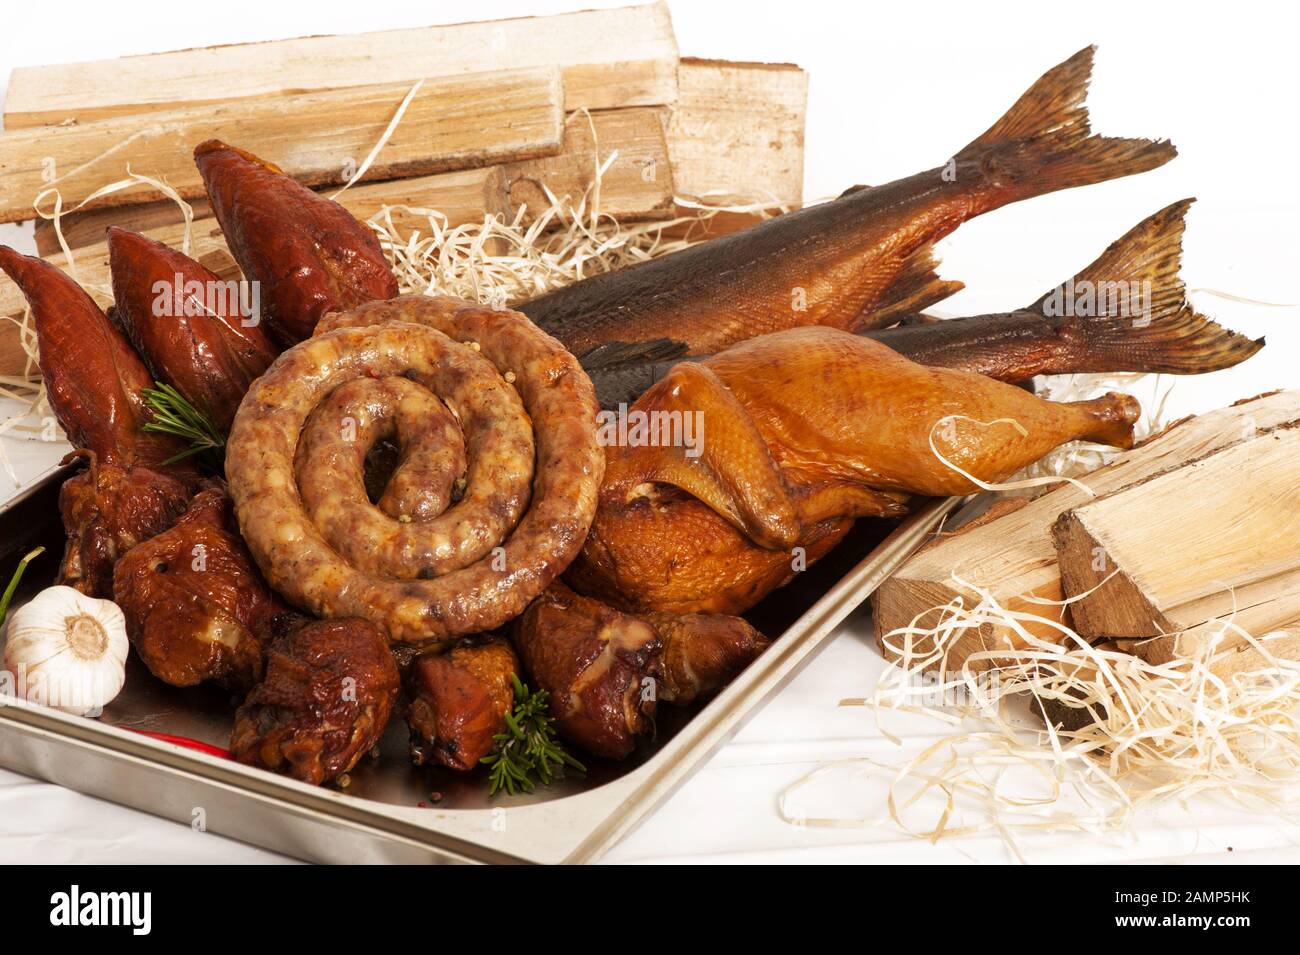 Smoked fish, poultry and sausages on a background with wood and sawdust Stock Photo